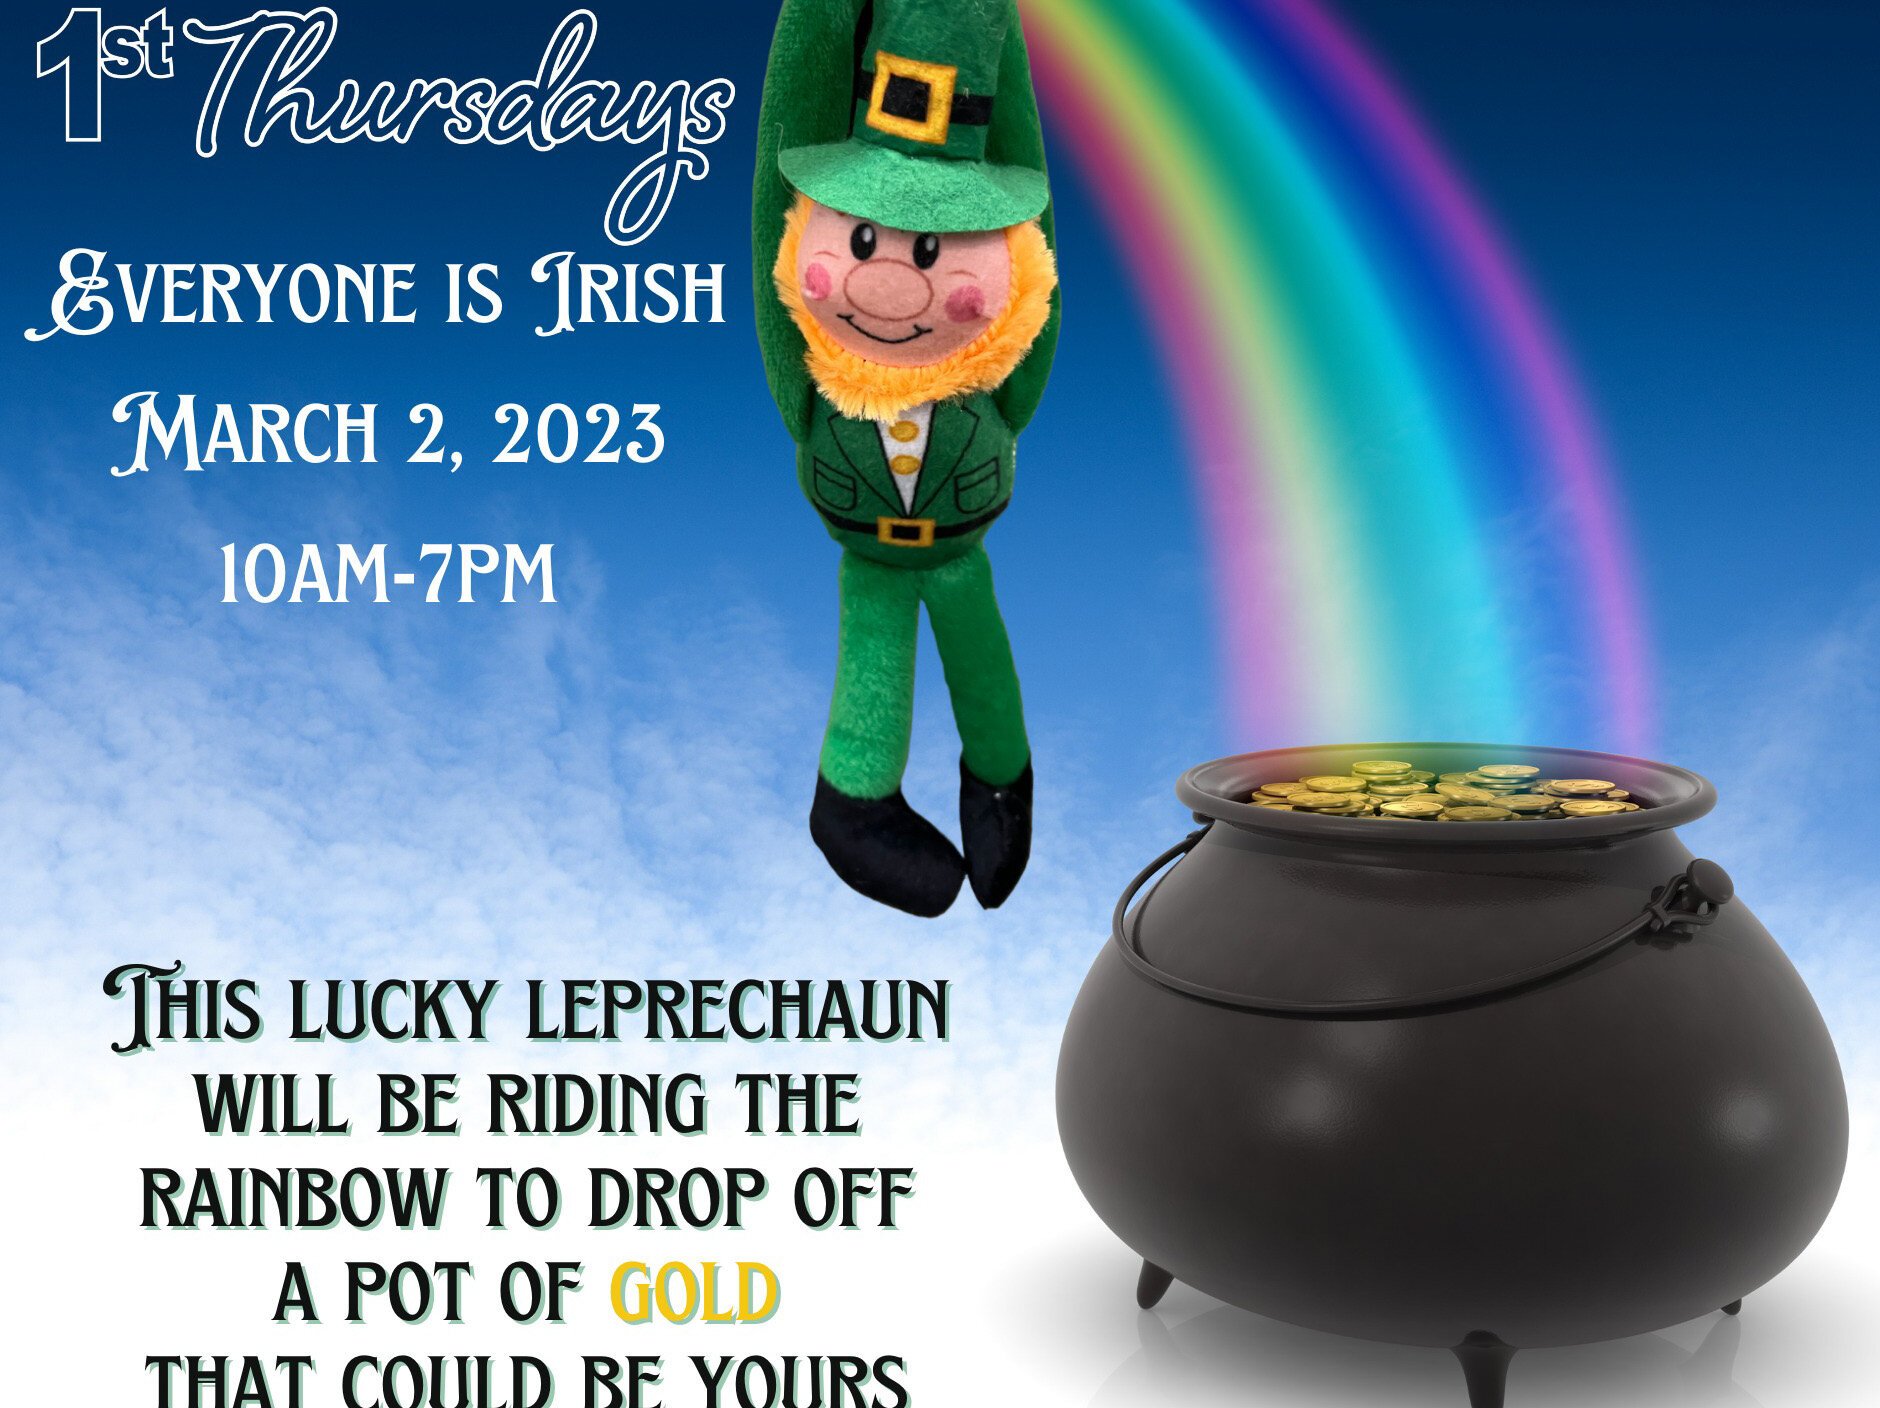 A promotion for the Irish-themed event this month.